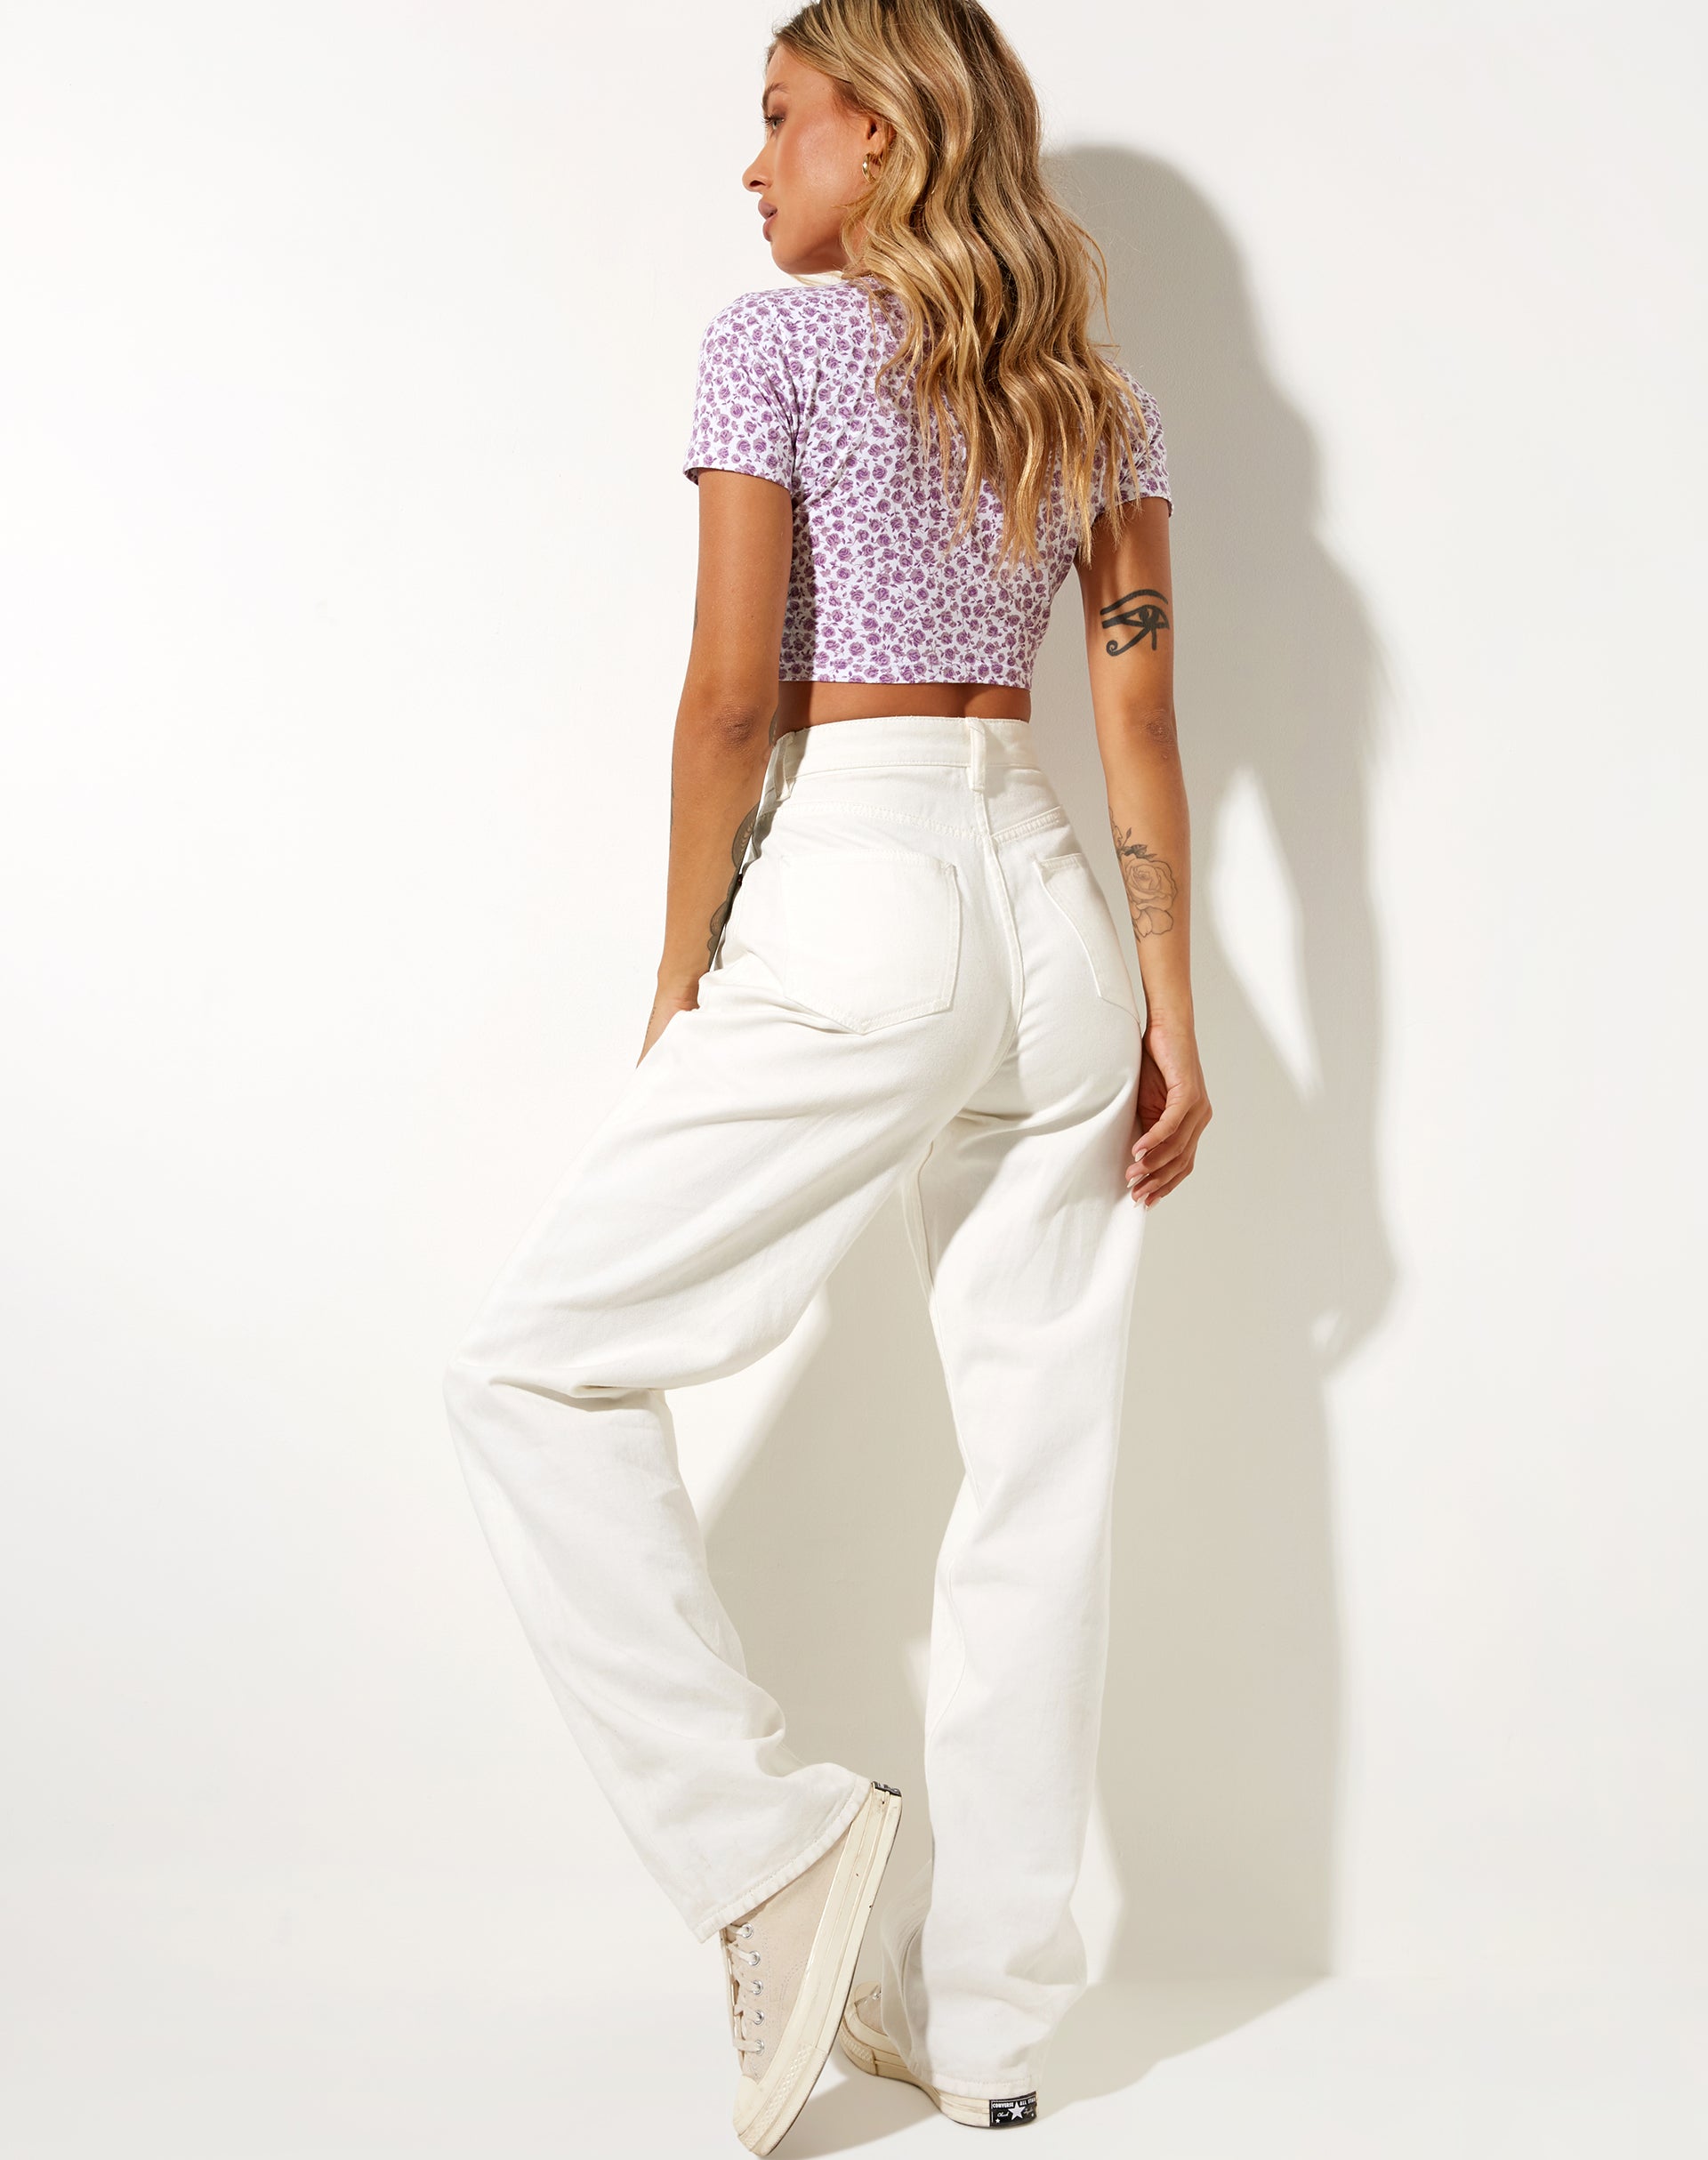 Image of Mieye Crop Top in Ditsy Rose Lilac